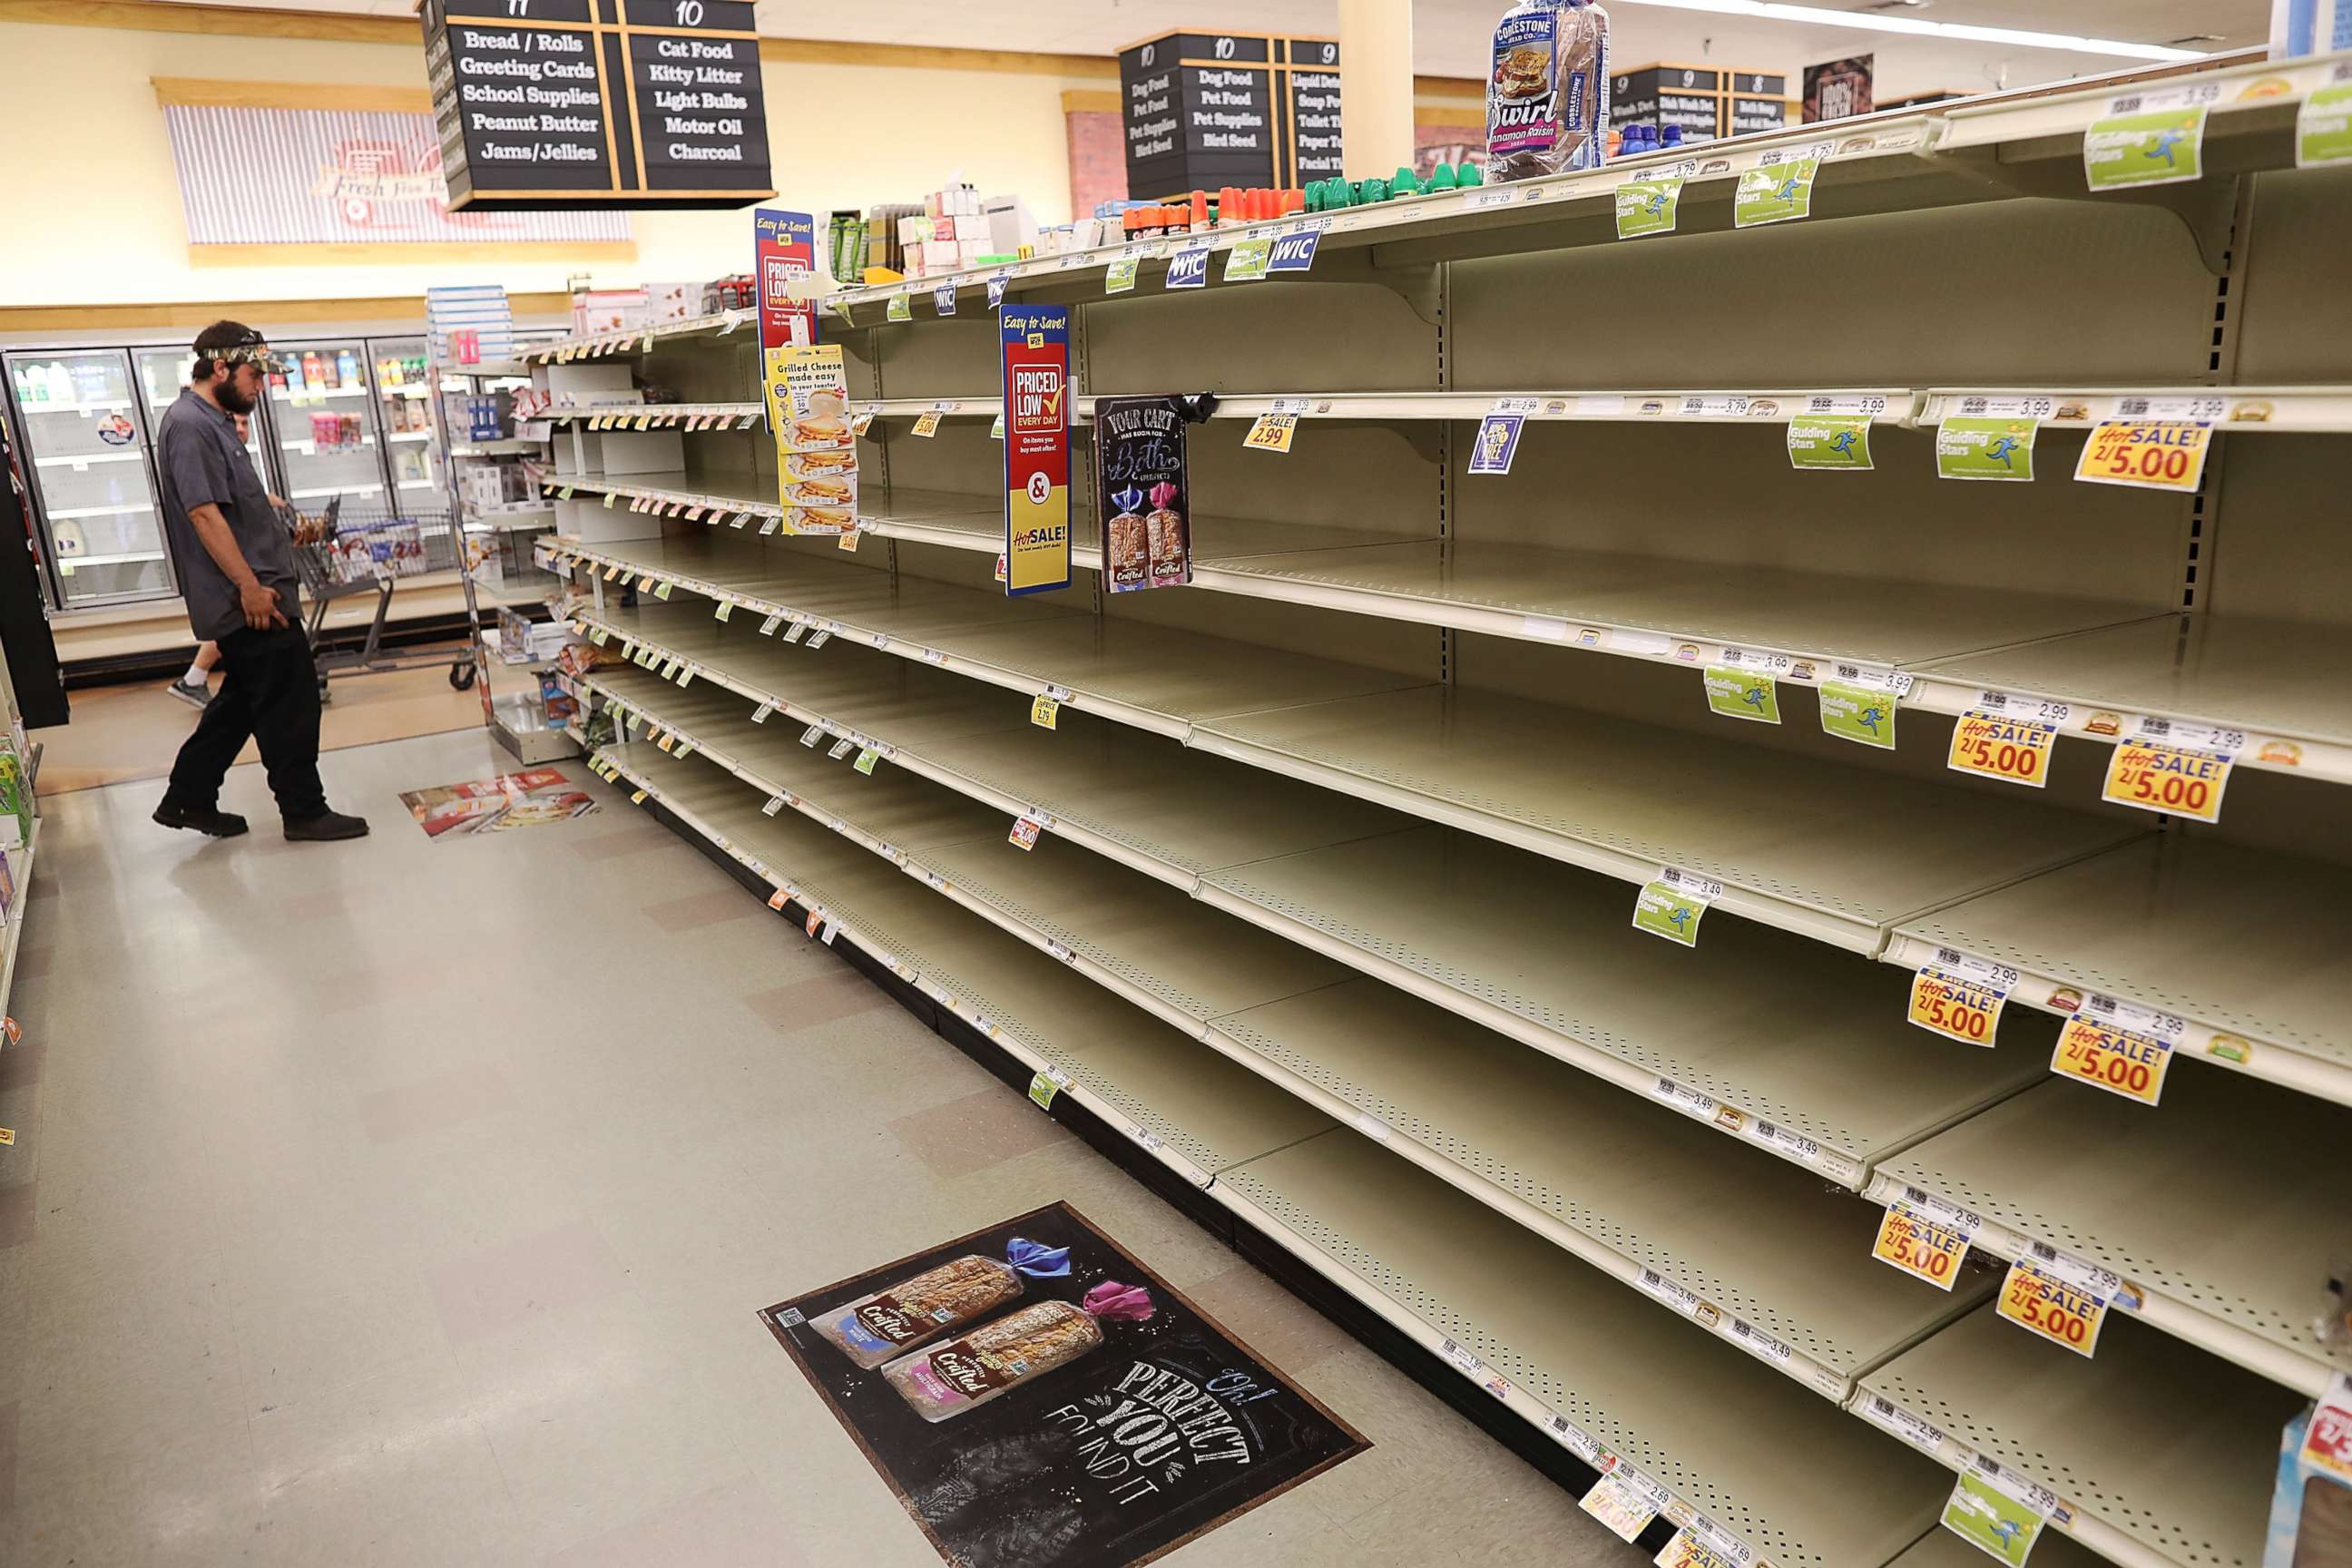 PHOTO: A store's bread shelves are bare as people stock up on food ahead of the arrival of Hurricane Florence on Sept. 11, 2018 in Myrtle Beach, South Carolina.